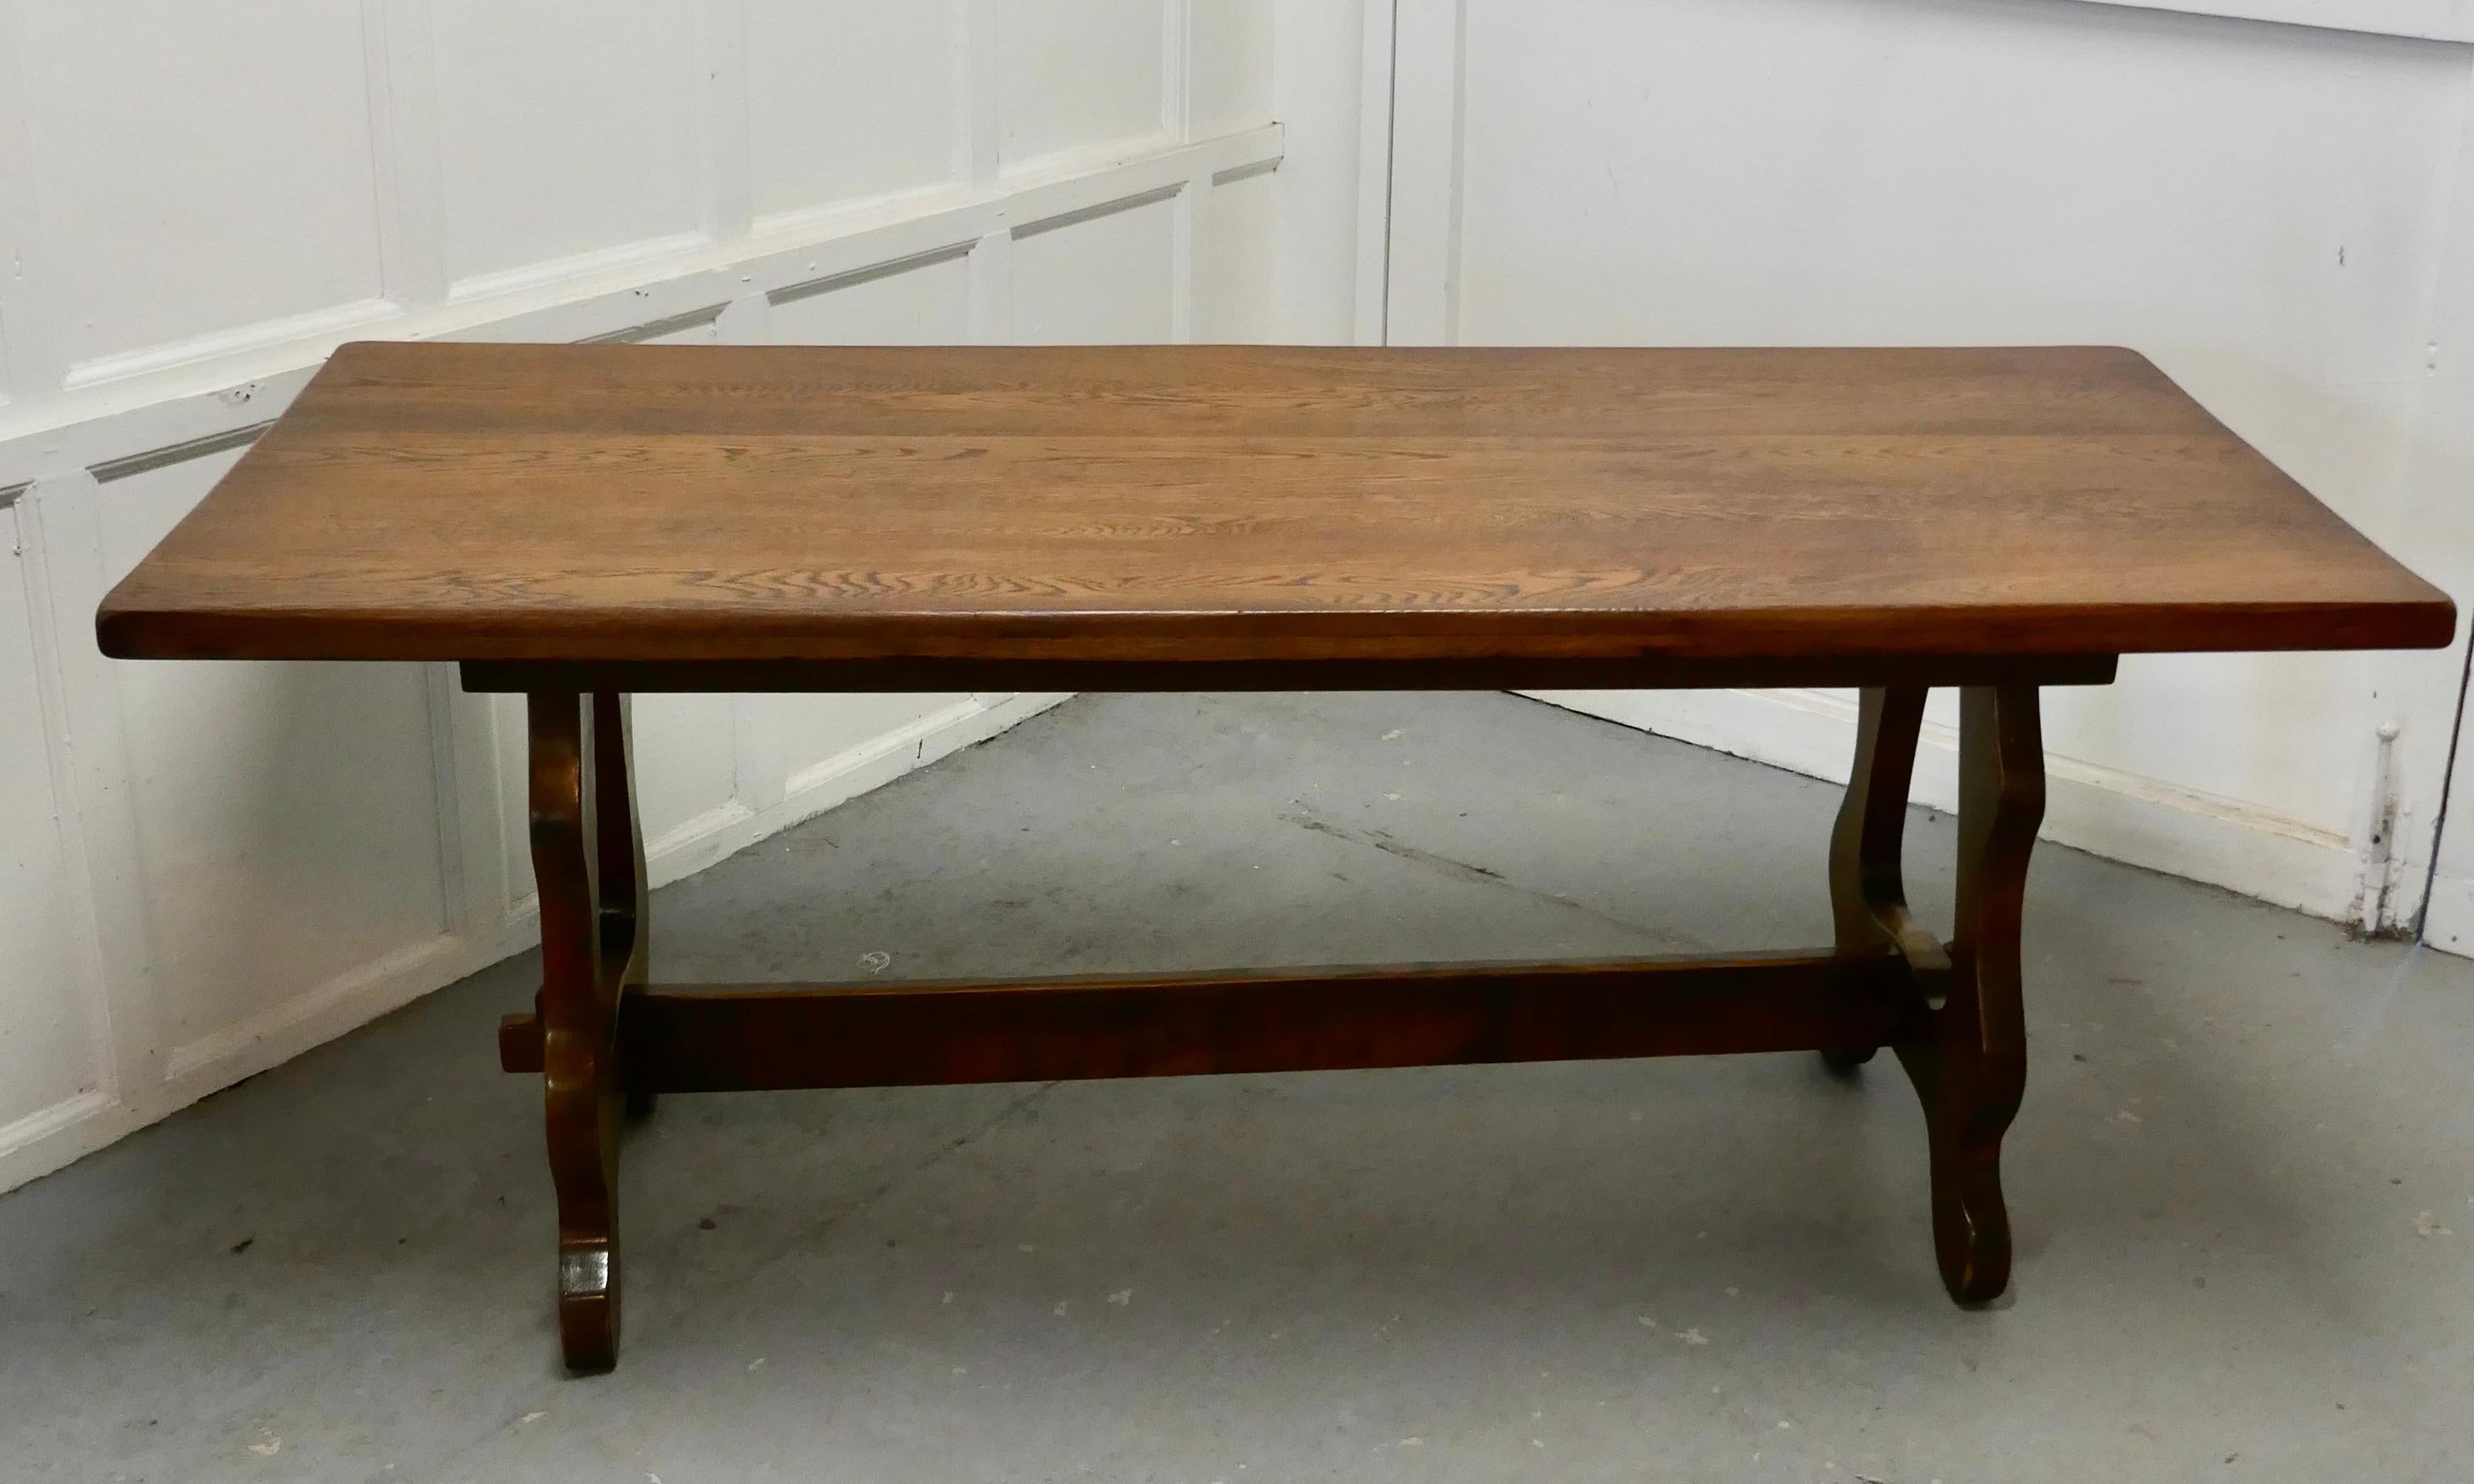 Arts & Crafts oak refectory table 

Oak refectory, this is a great table, the top is in 2” thick Oak, with splendid patina 
The table legs are a lyre design, the top can be removed for ease of transport it is sound and does not wobble
The table